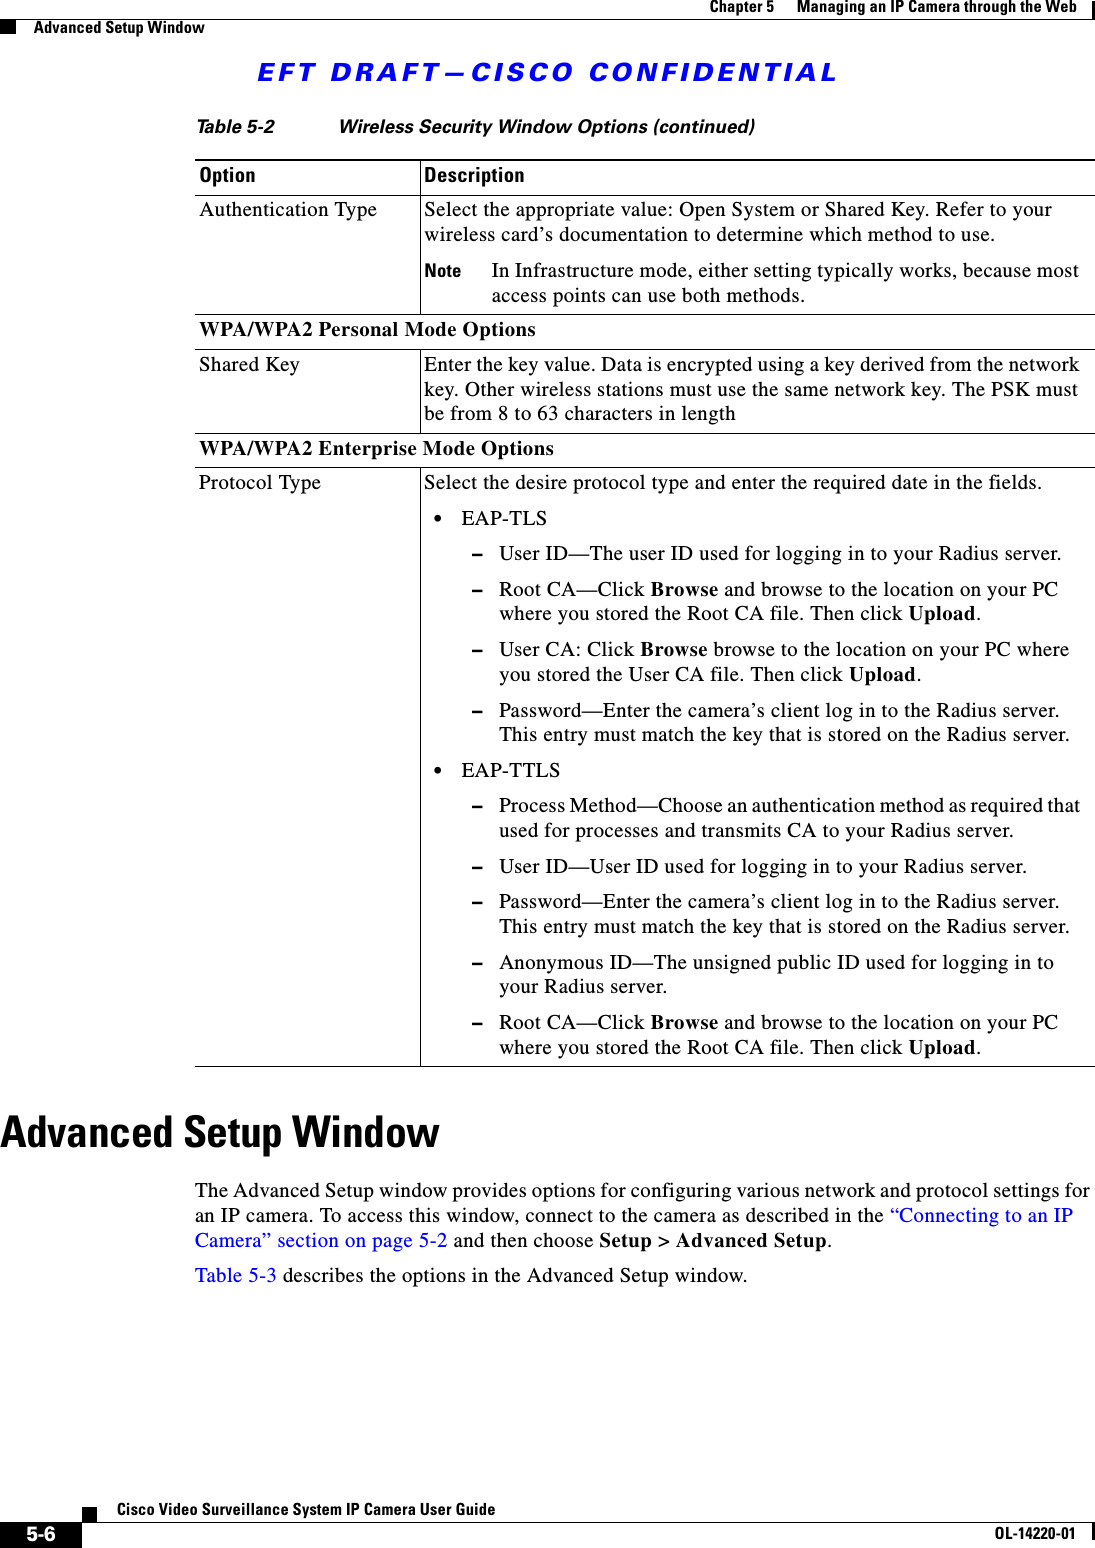 EFT DRAFT—CISCO CONFIDENTIAL5-6Cisco Video Surveillance System IP Camera User GuideOL-14220-01Chapter 5      Managing an IP Camera through the WebAdvanced Setup WindowAdvanced Setup WindowThe Advanced Setup window provides options for configuring various network and protocol settings for an IP camera. To access this window, connect to the camera as described in the “Connecting to an IP Camera” section on page 5-2 and then choose Setup &gt; Advanced Setup.Table 5-3 describes the options in the Advanced Setup window.Authentication Type Select the appropriate value: Open System or Shared Key. Refer to your wireless card’s documentation to determine which method to use.Note In Infrastructure mode, either setting typically works, because most access points can use both methods.WPA/WPA2 Personal Mode OptionsShared Key Enter the key value. Data is encrypted using a key derived from the network key. Other wireless stations must use the same network key. The PSK must be from 8 to 63 characters in lengthWPA/WPA2 Enterprise Mode OptionsProtocol Type Select the desire protocol type and enter the required date in the fields.•EAP-TLS –User ID—The user ID used for logging in to your Radius server.–Root CA—Click Browse and browse to the location on your PC where you stored the Root CA file. Then click Upload.–User CA: Click Browse browse to the location on your PC where you stored the User CA file. Then click Upload.–Password—Enter the camera’s client log in to the Radius server. This entry must match the key that is stored on the Radius server.•EAP-TTLS–Process Method—Choose an authentication method as required that used for processes and transmits CA to your Radius server.–User ID—User ID used for logging in to your Radius server.–Password—Enter the camera’s client log in to the Radius server. This entry must match the key that is stored on the Radius server.–Anonymous ID—The unsigned public ID used for logging in to your Radius server.–Root CA—Click Browse and browse to the location on your PC where you stored the Root CA file. Then click Upload.Table 5-2 Wireless Security Window Options (continued)Option Description